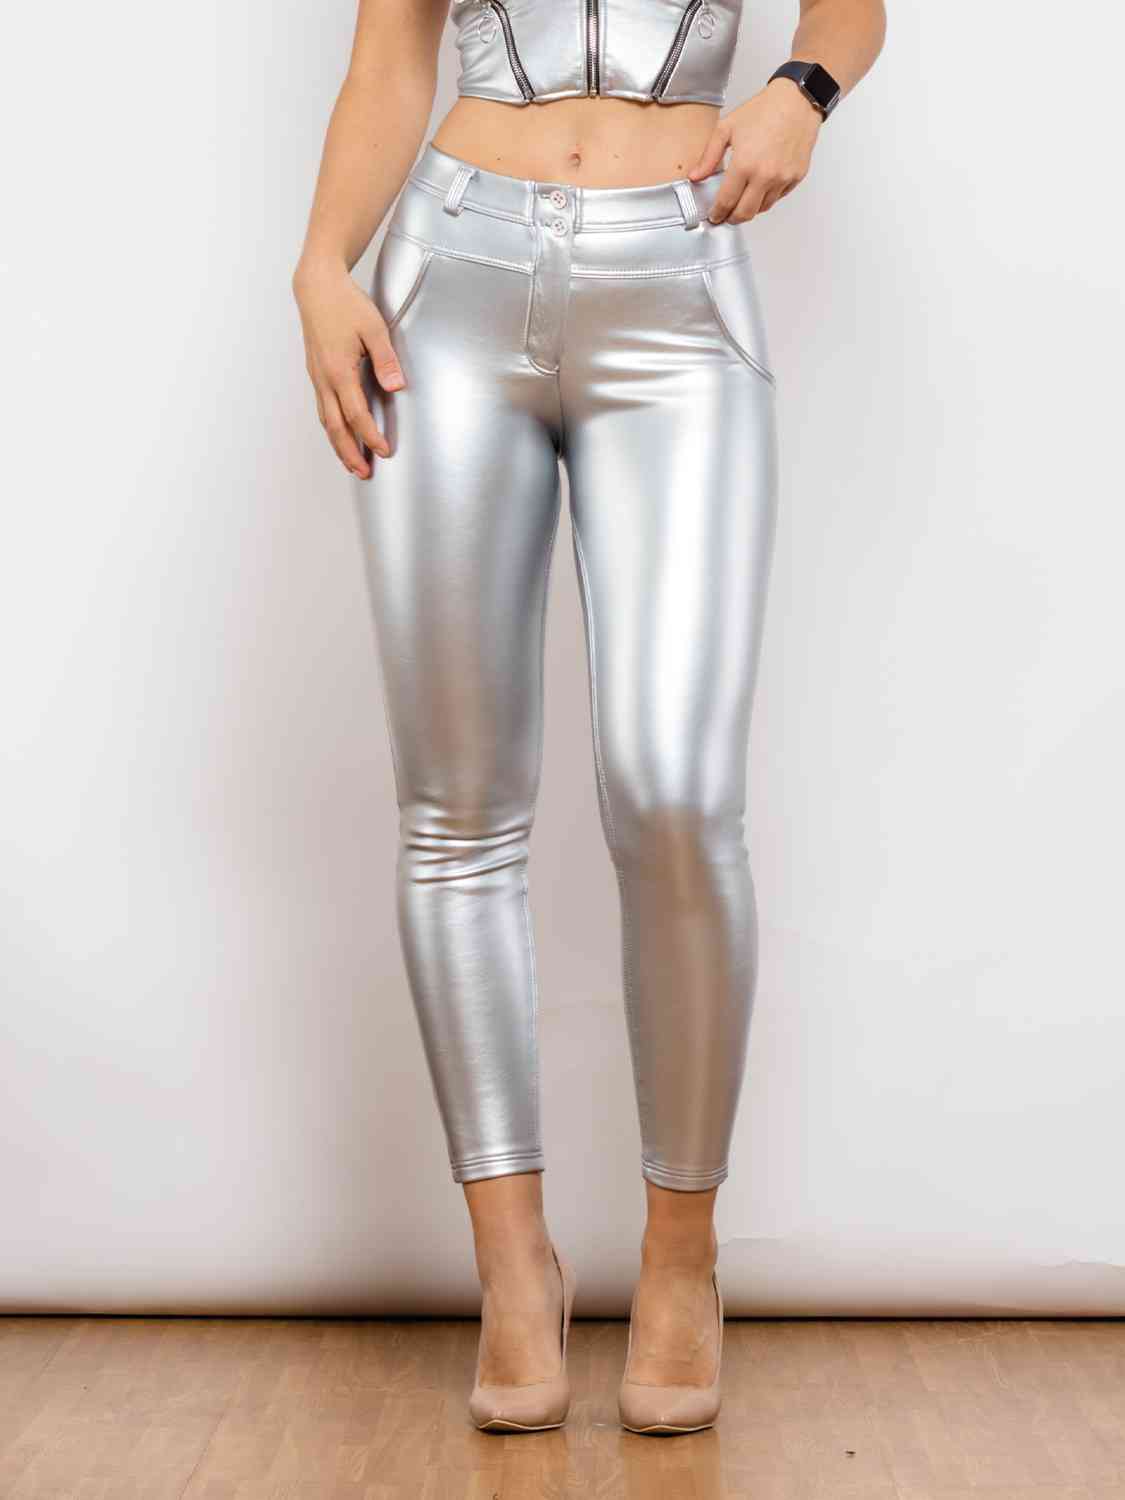 a woman wearing silver pants and a crop top